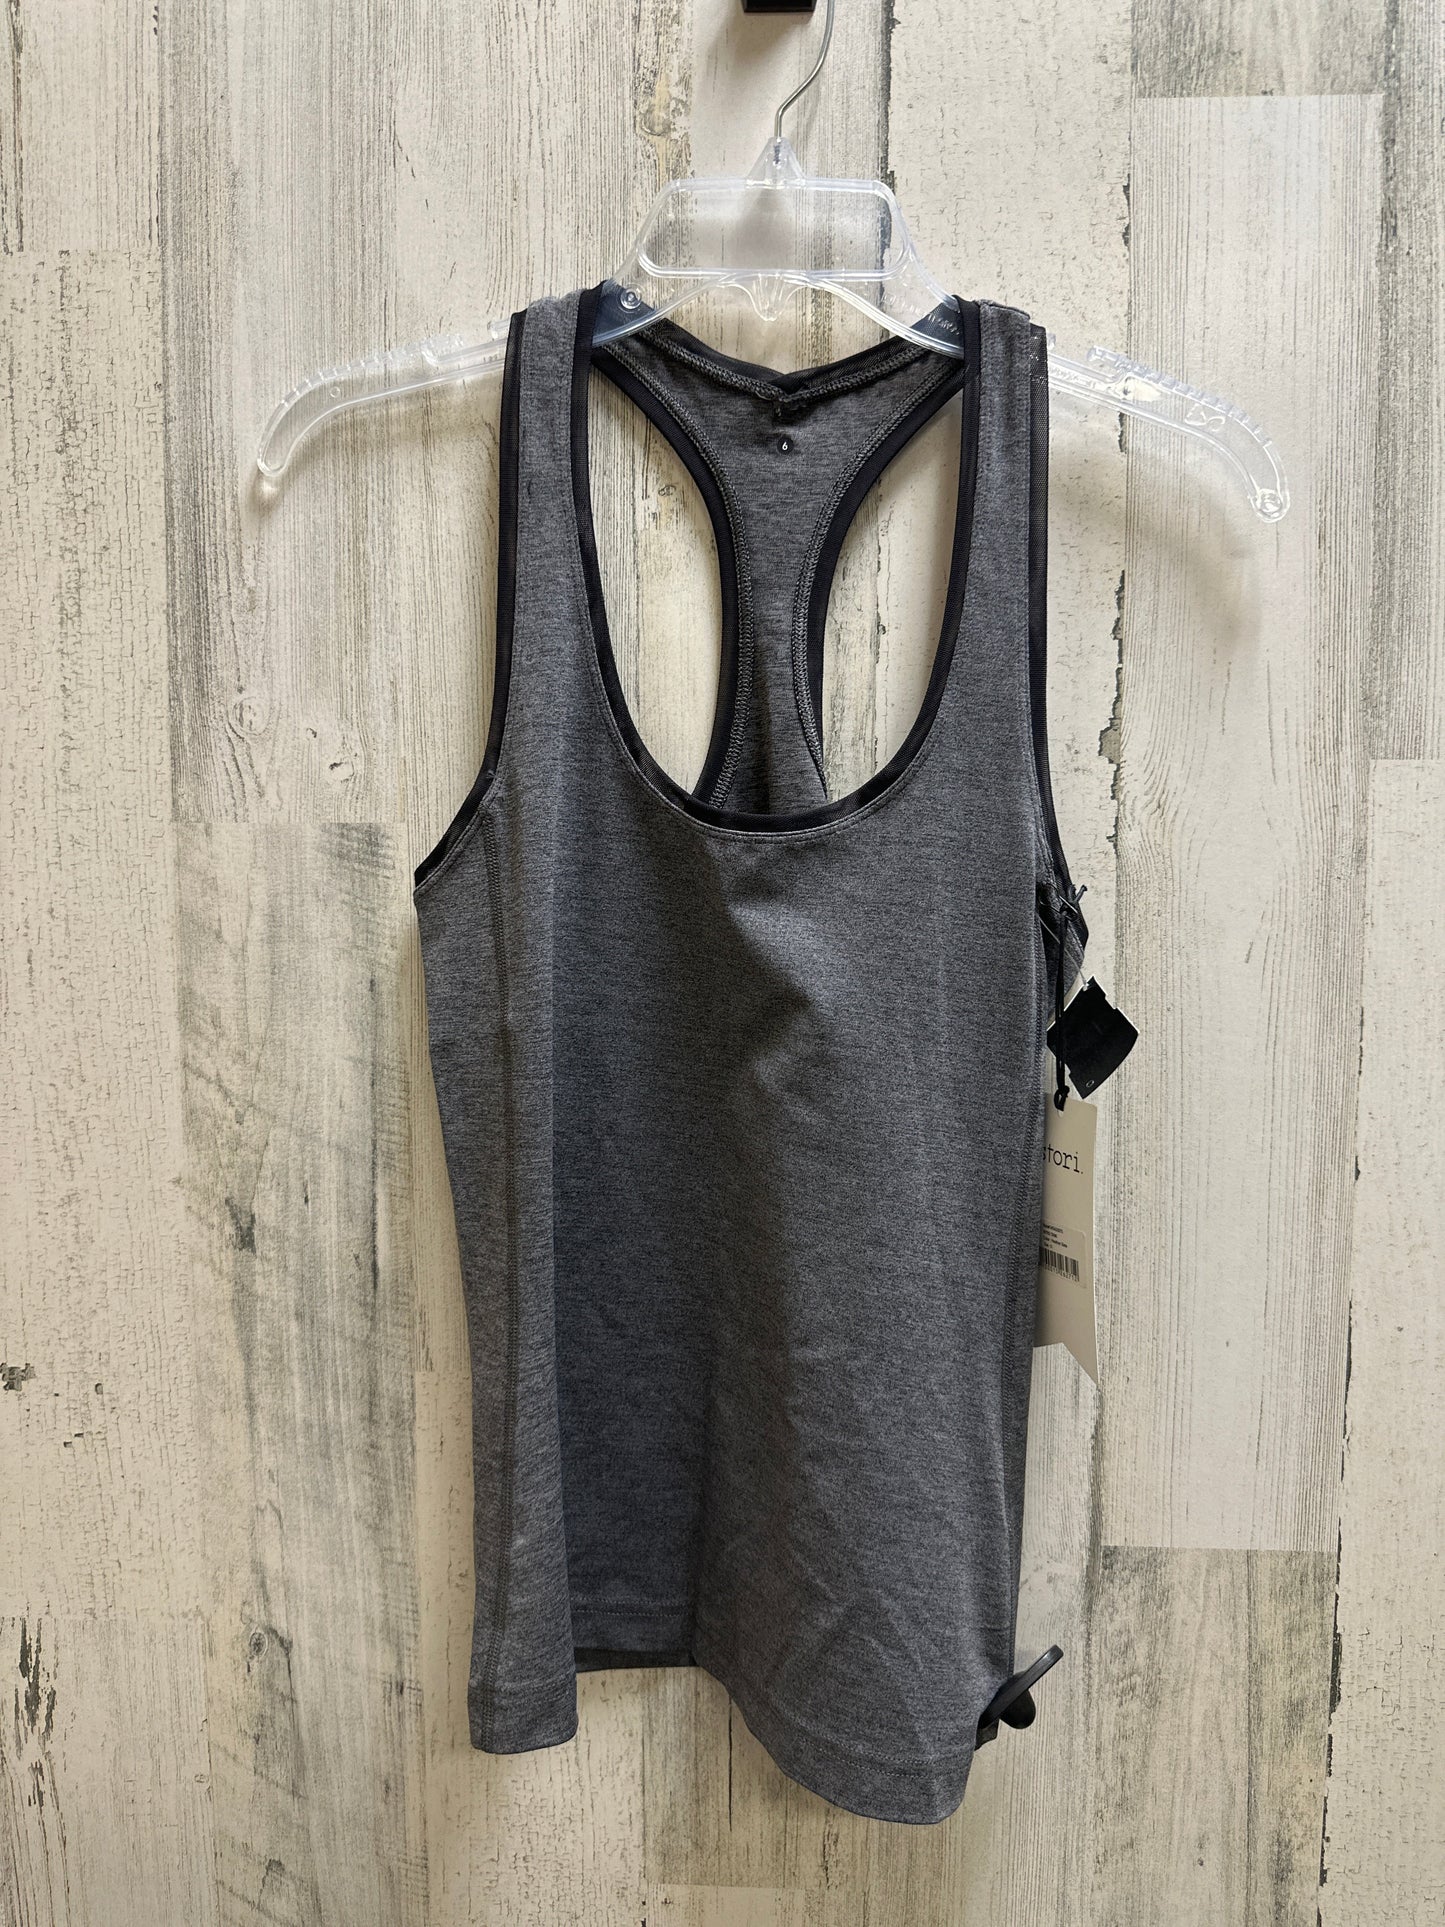 Grey Athletic Tank Top Clothes Mentor, Size M